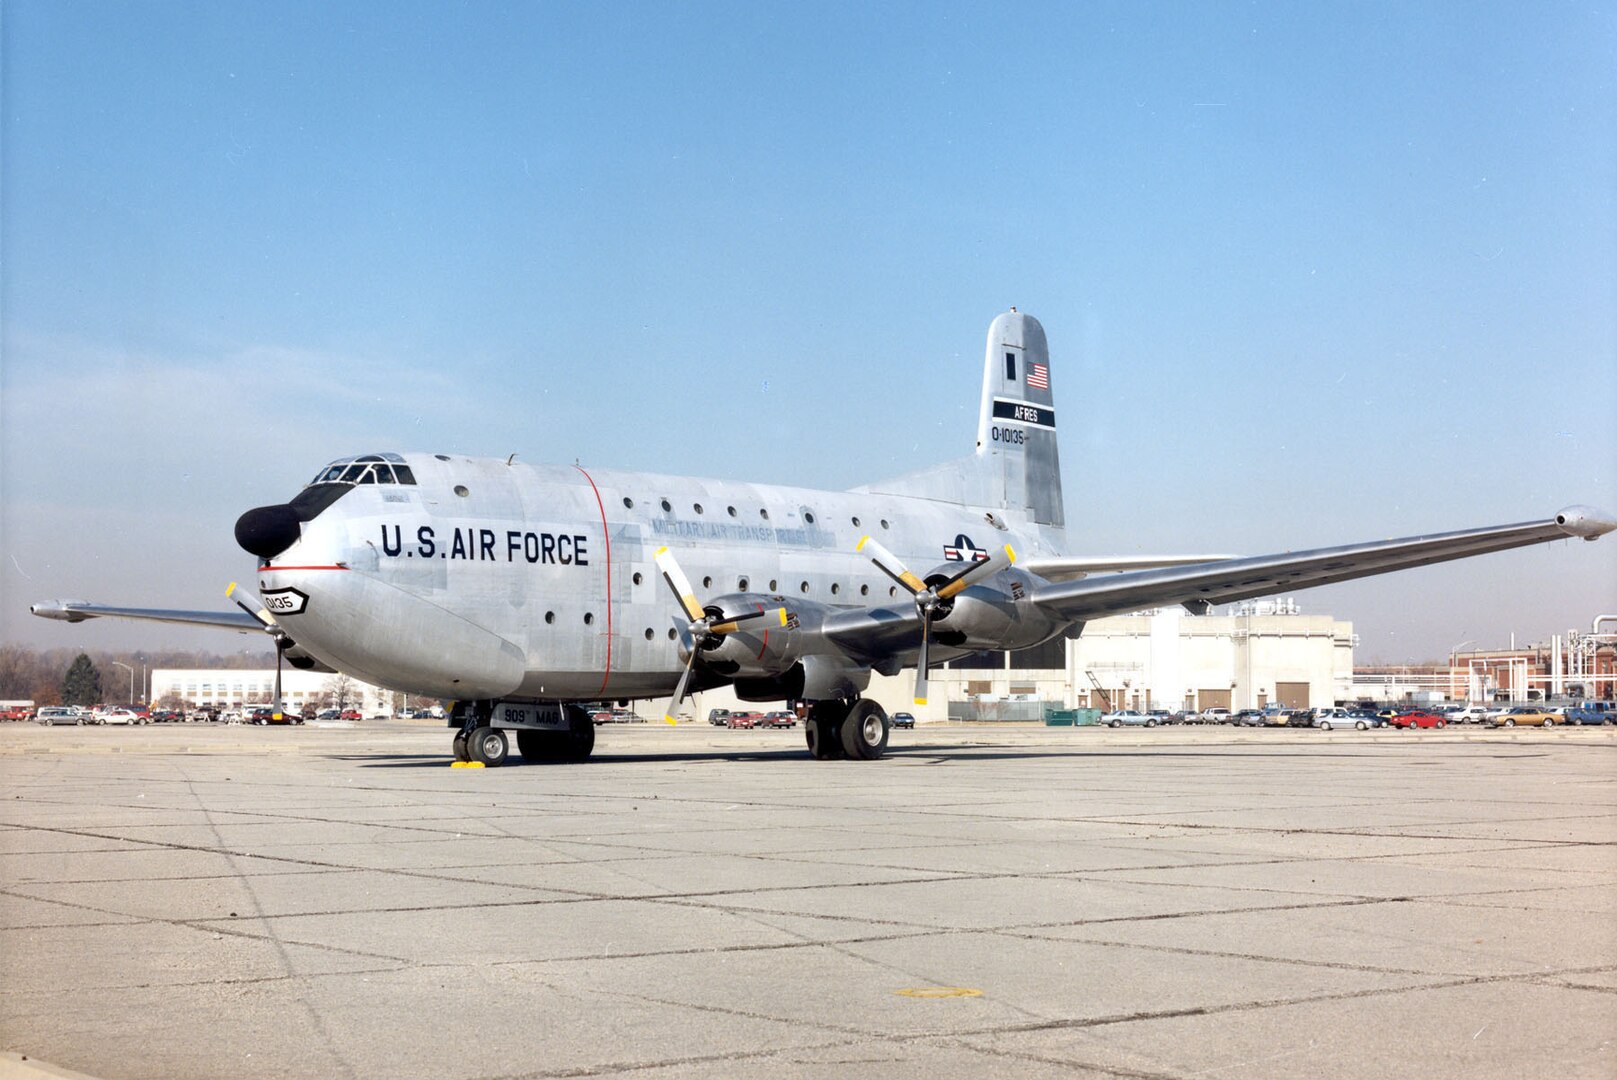 This Douglas C-124C Globemaster at the National Museum of the United States Air Force is similar to the craft that crashed in 1952 at a remote Alaska site.